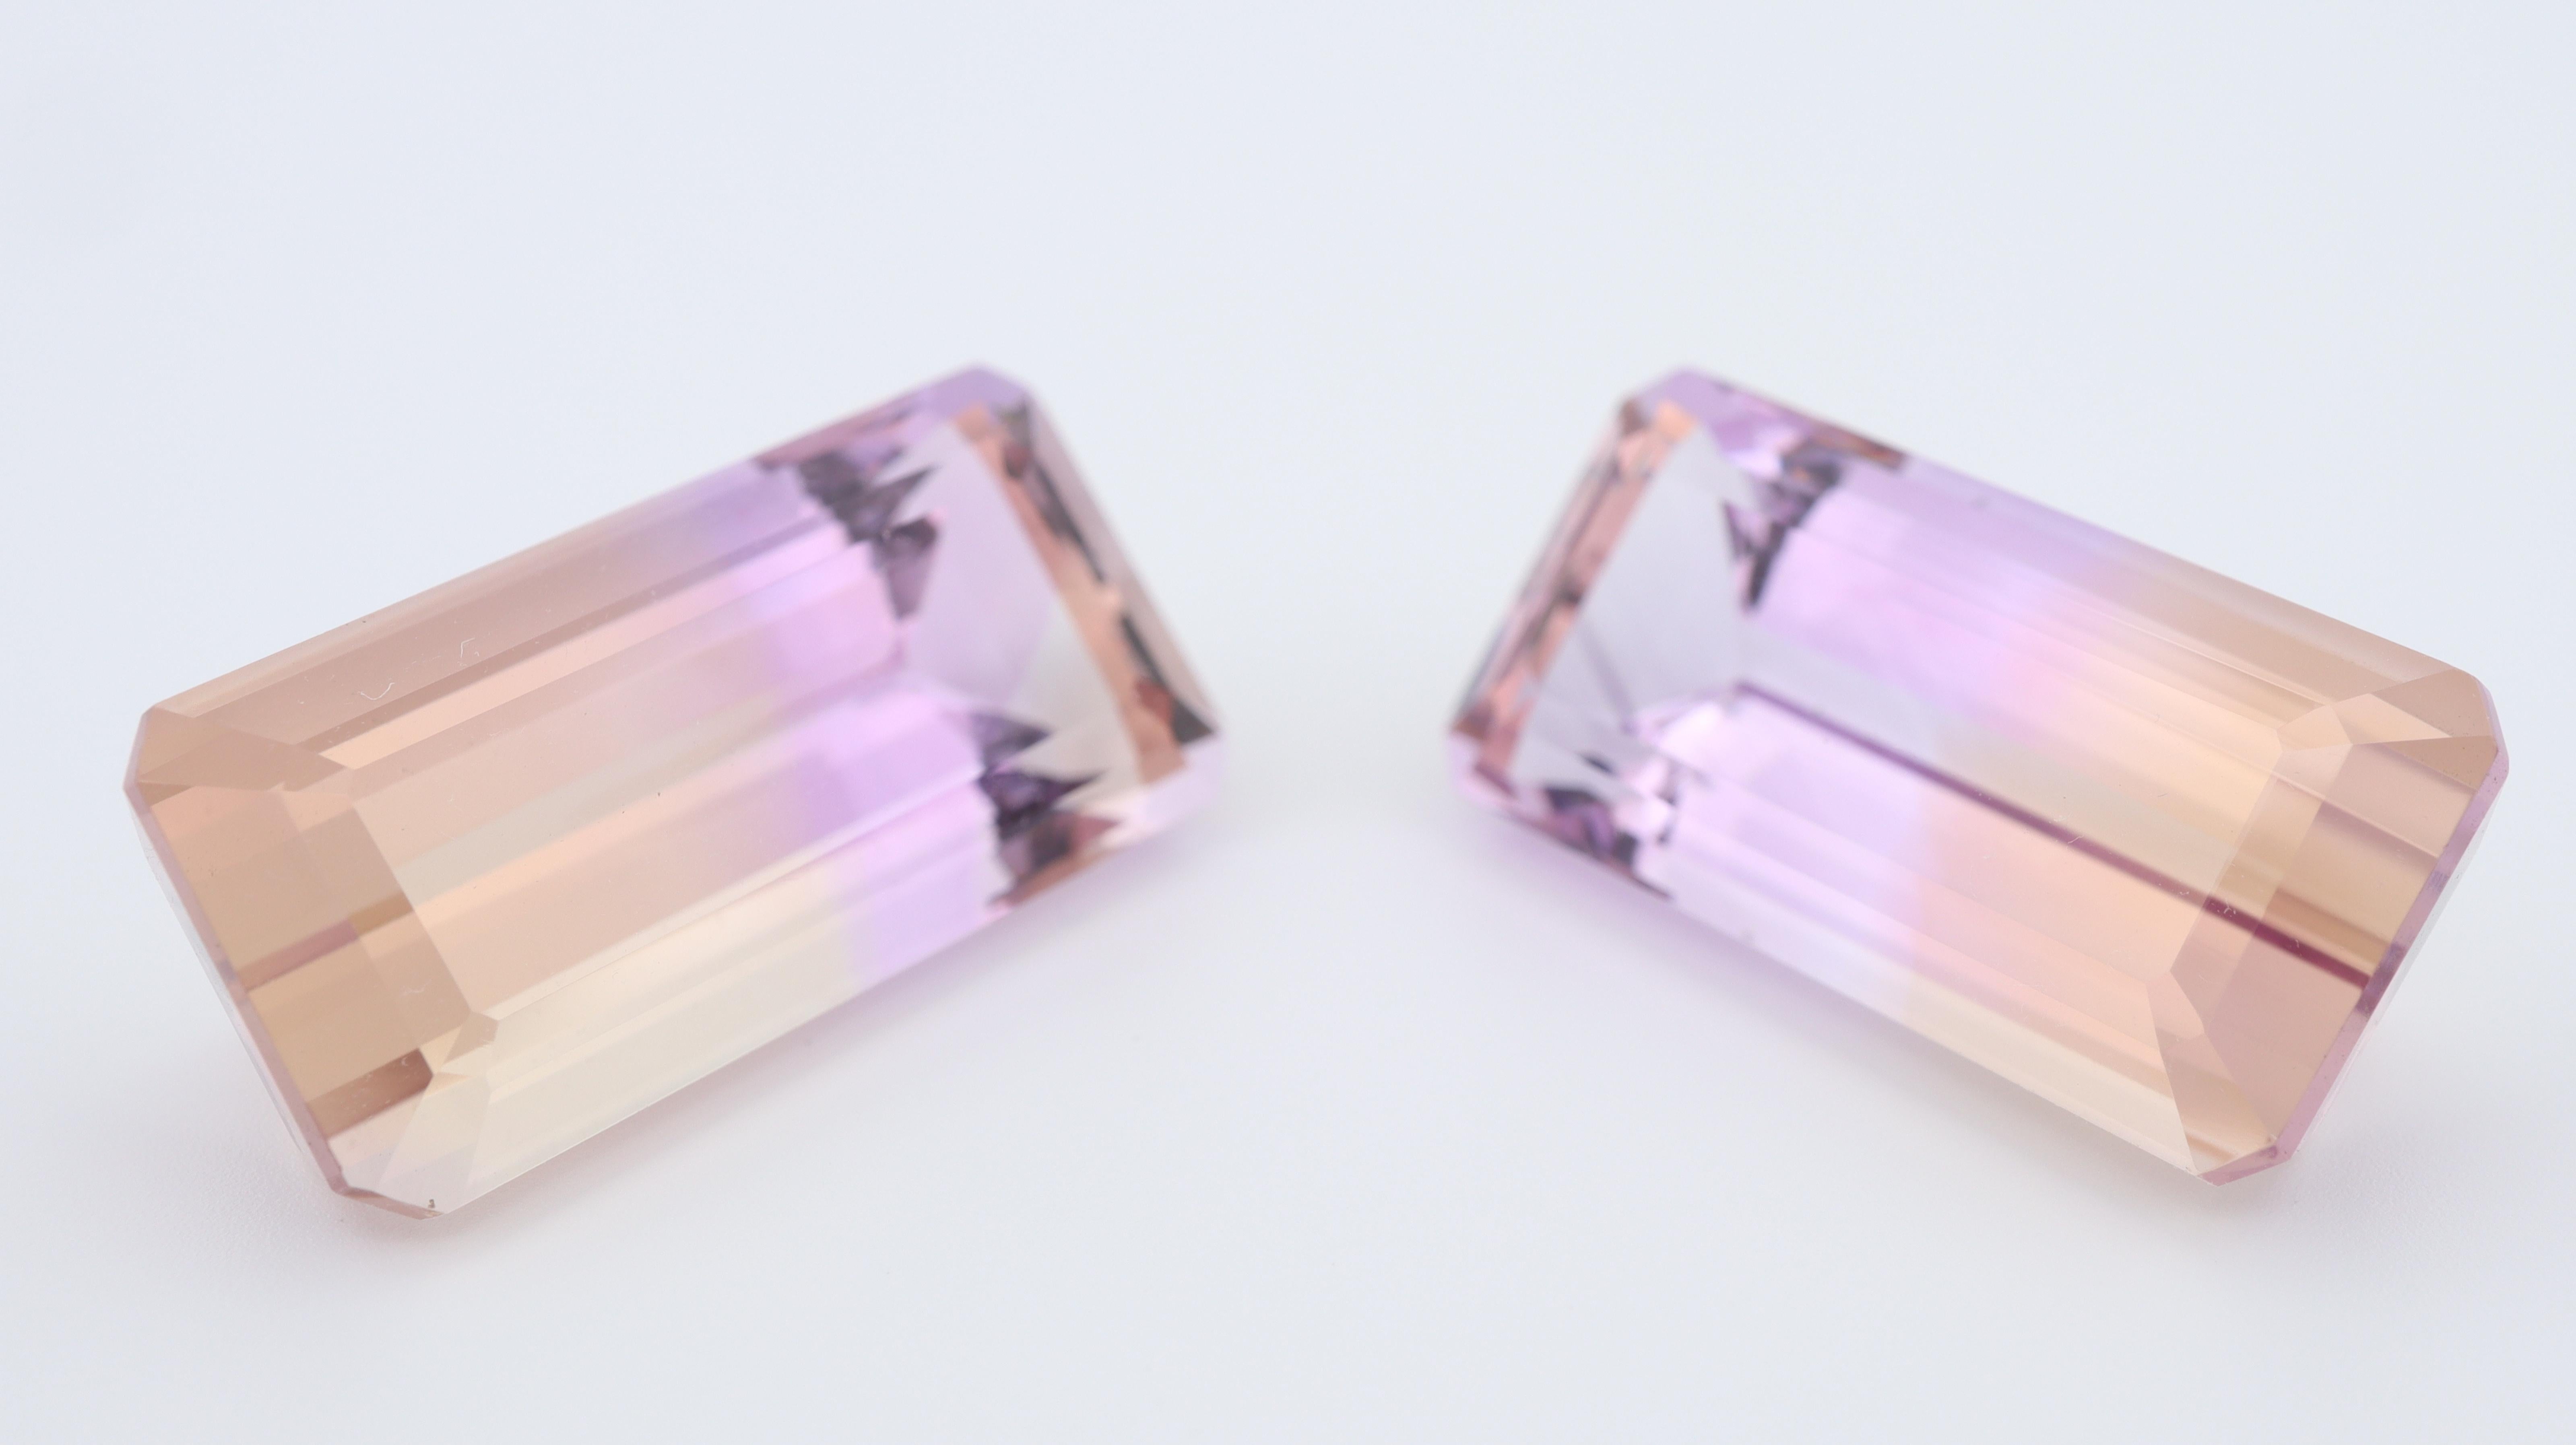 A large pair of Ametrines with well defined color zoning. 
This is a well selected pairs and the color zoning is homogenous in both stones, with a very distinctive colors and excellent saturation.

Ametrines are a natural variety of quartz, and a